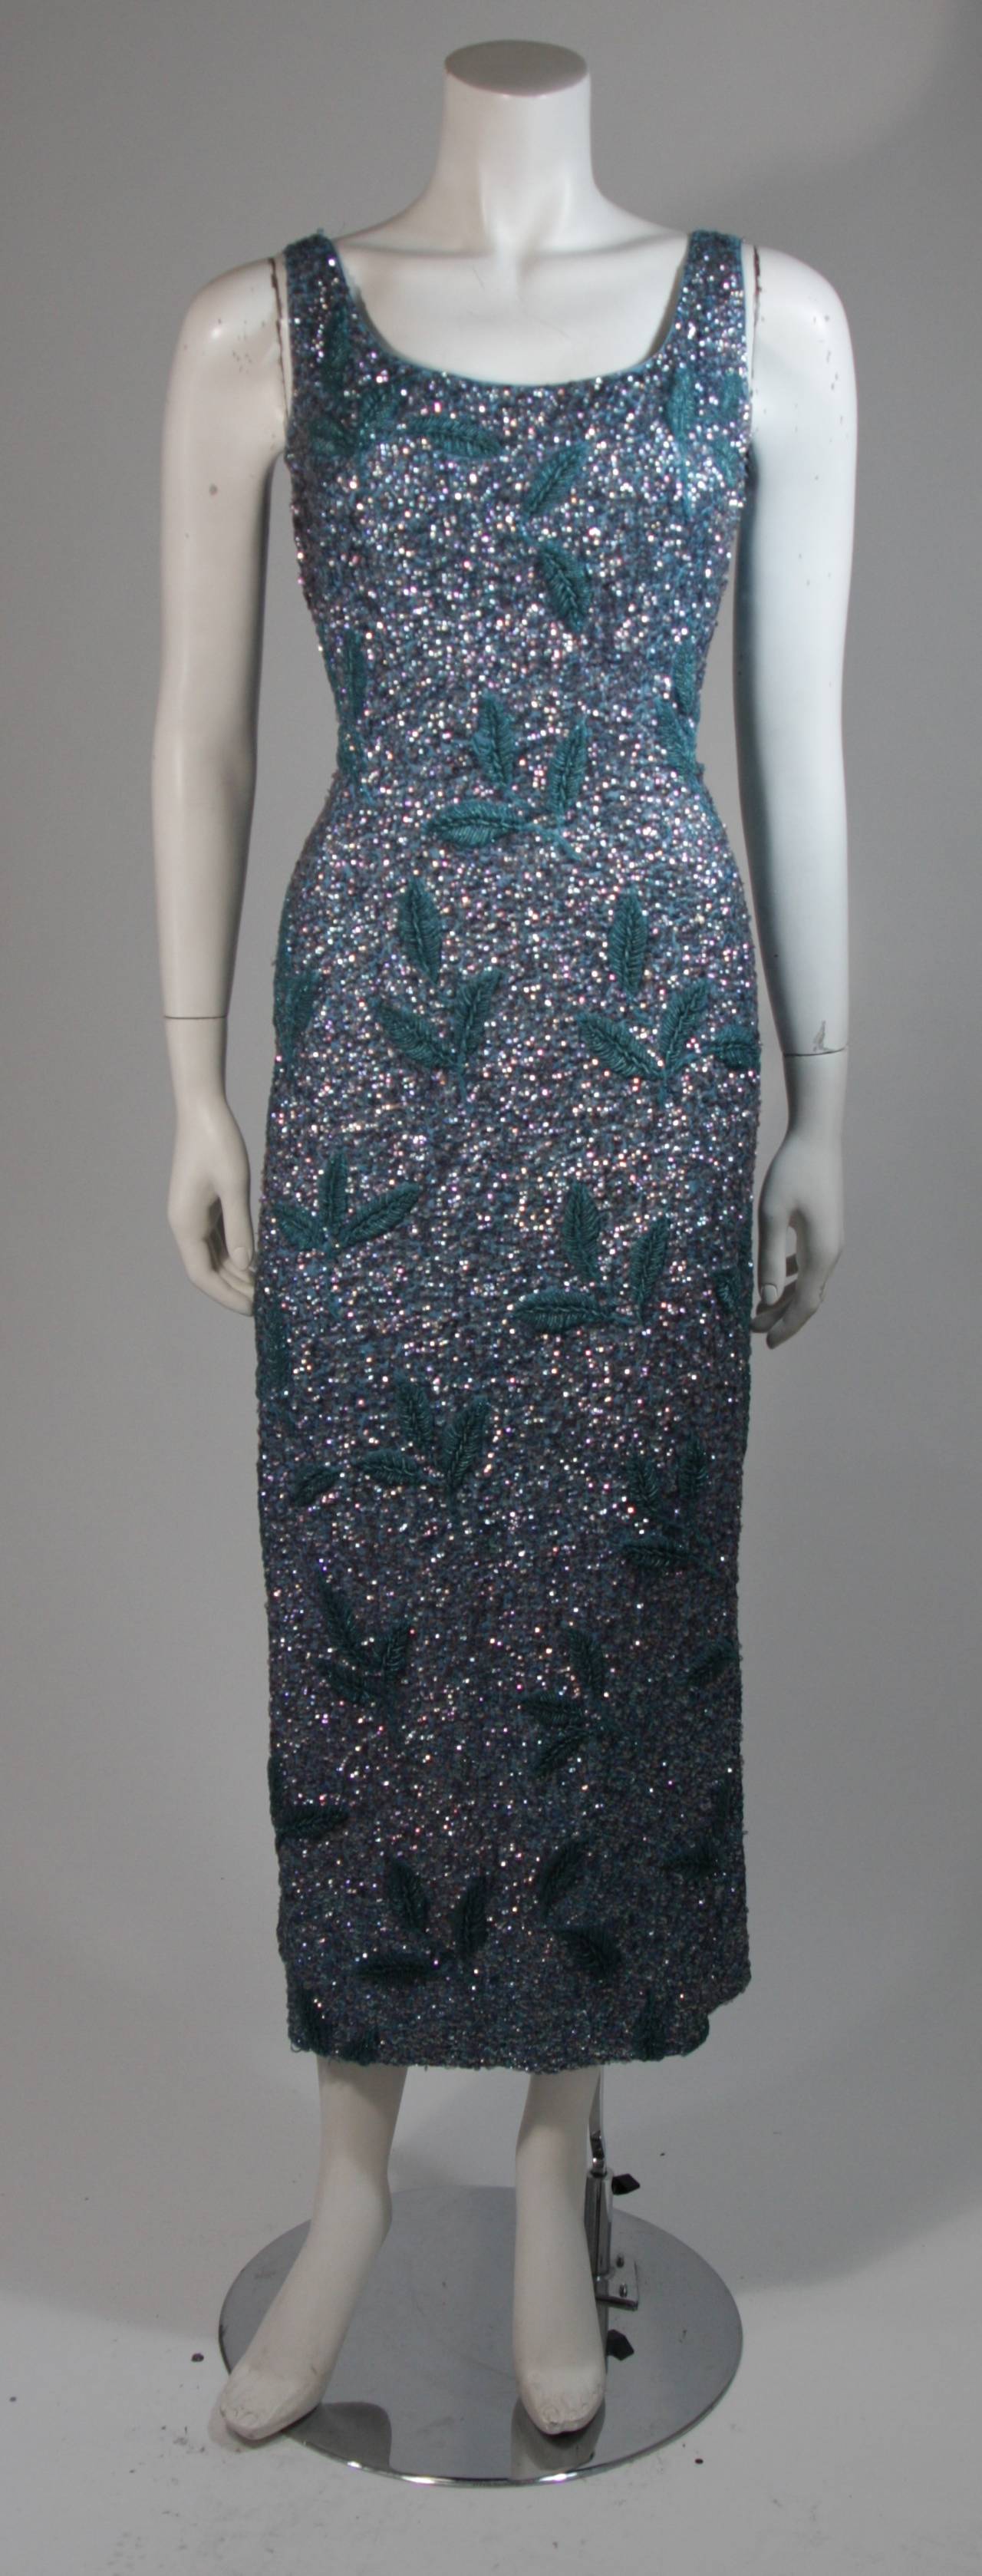 This dress features heavy embellishment with beading and sequins in hues of blue. There is a leaf motif in beading and iridescent sequins. Center back zipper closure. In excellent vintage condition. 

**Please cross-reference measurements for